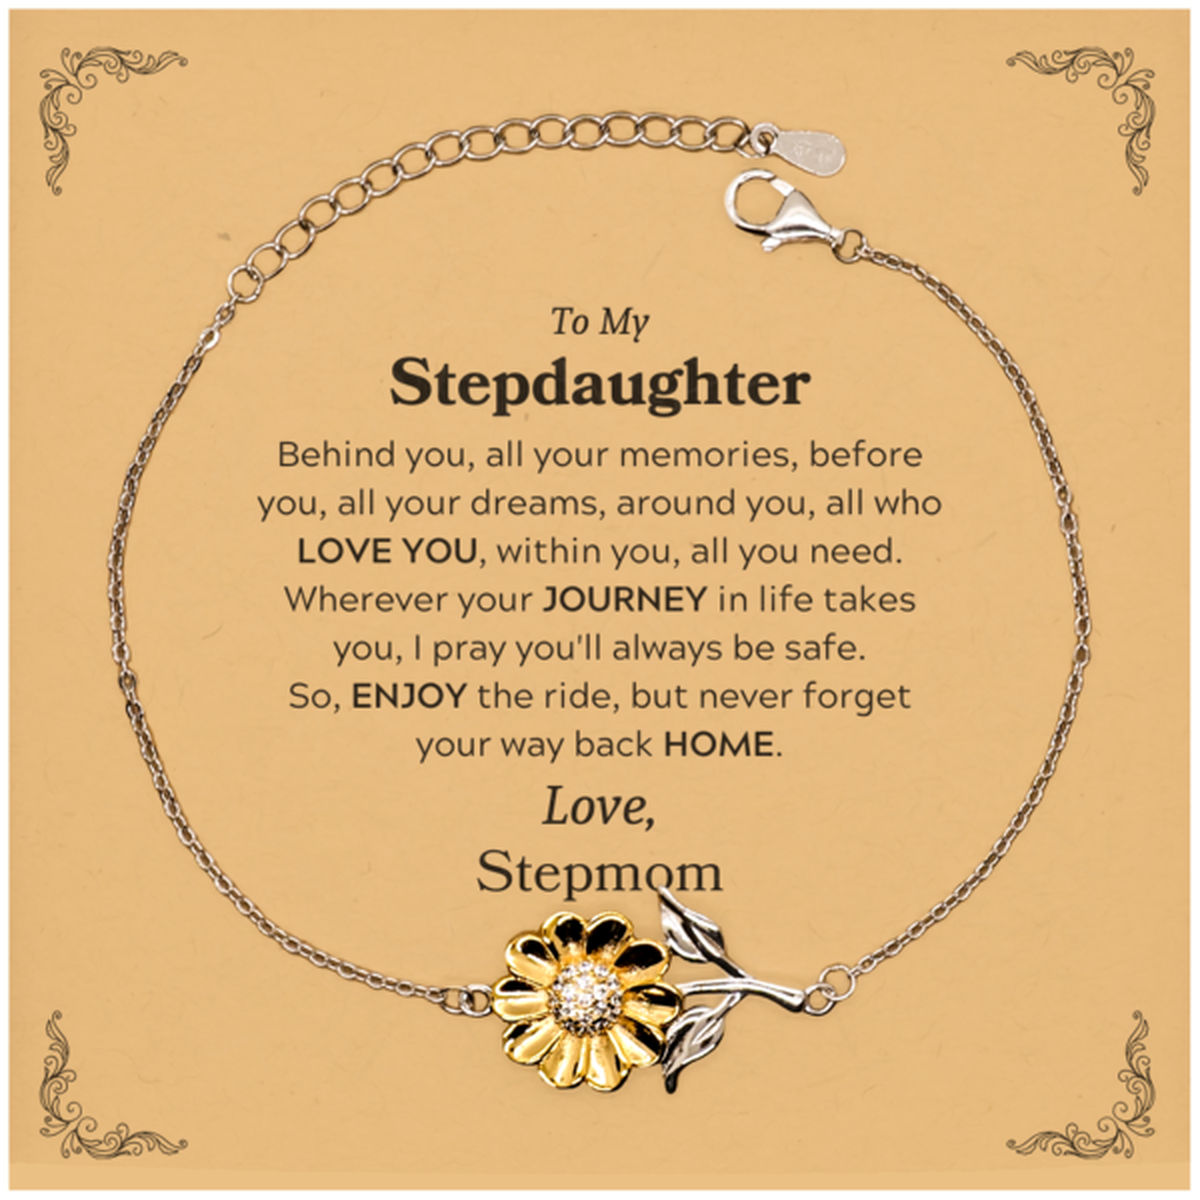 To My Stepdaughter Graduation Gifts from Stepmom, Stepdaughter Sunflower Bracelet Christmas Birthday Gifts for Stepdaughter Behind you, all your memories, before you, all your dreams. Love, Stepmom